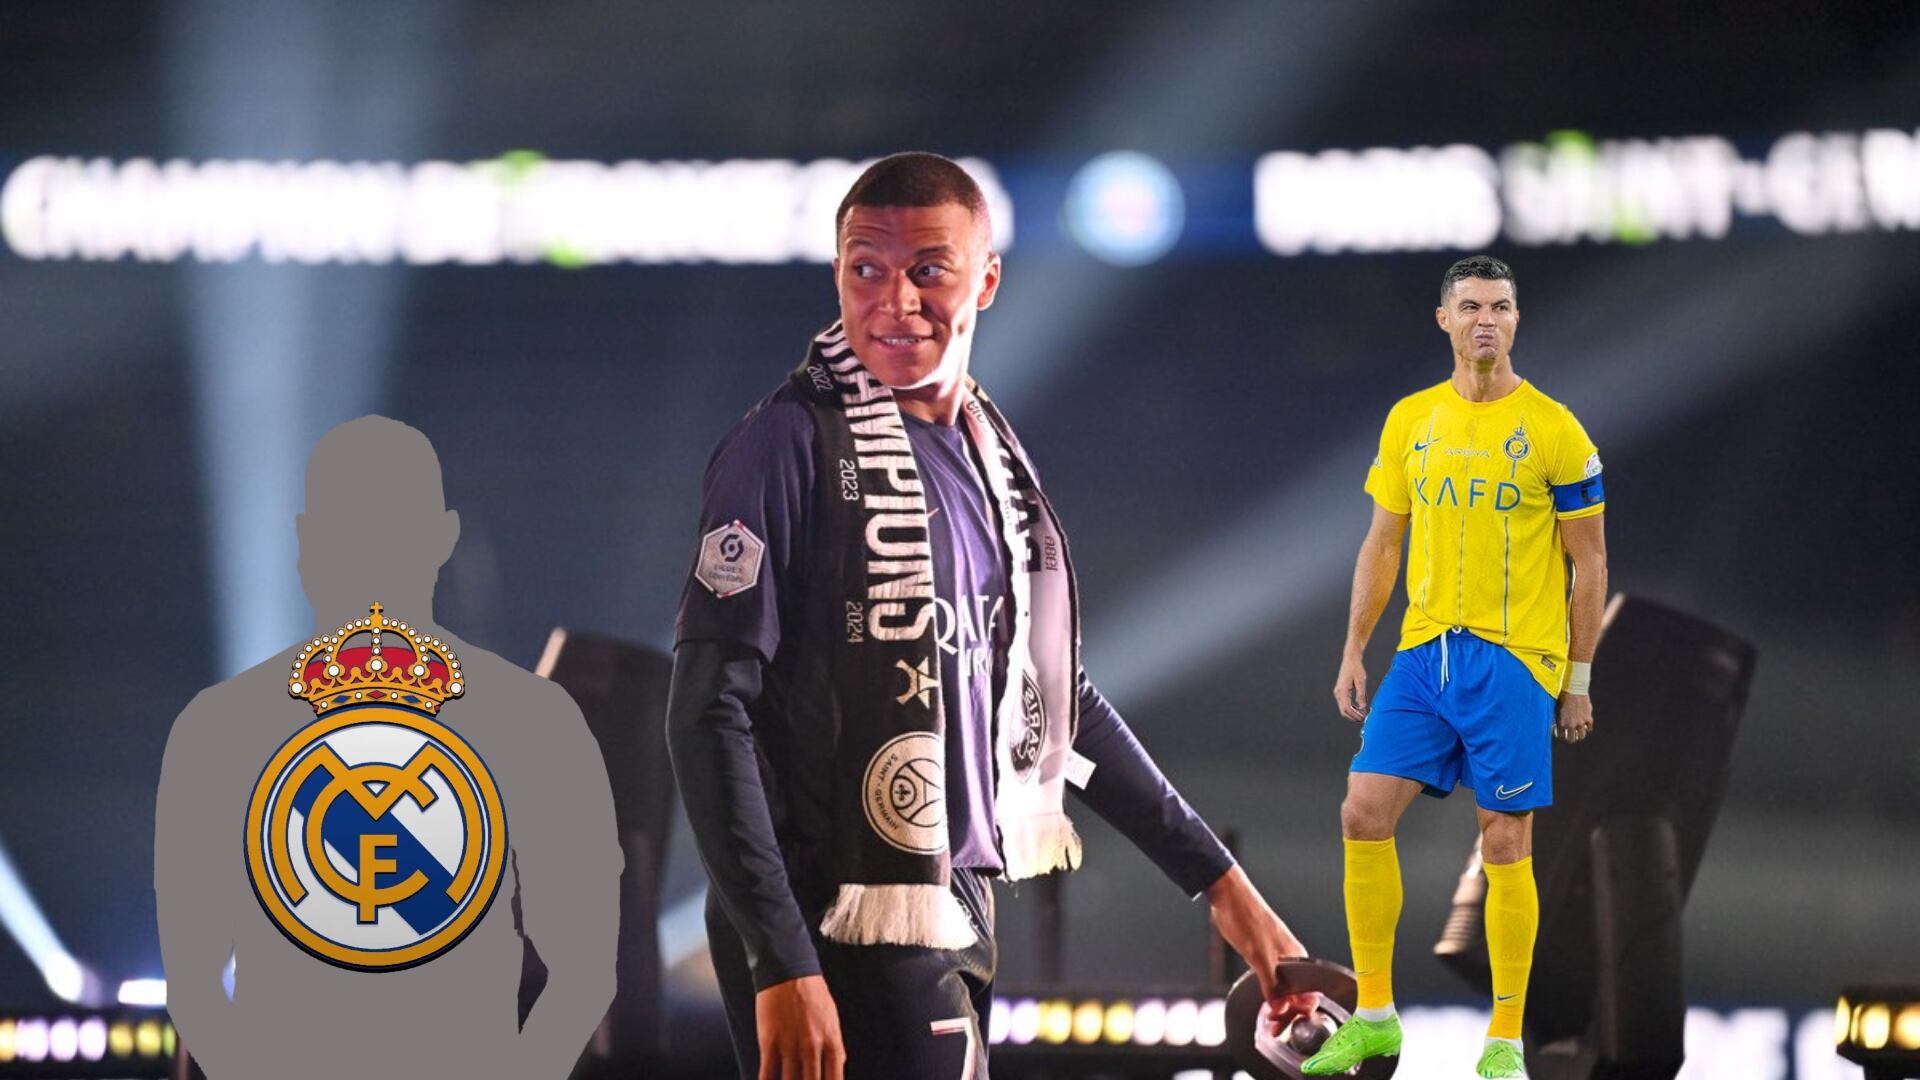 Mbappé would have a new neighbor, Real Madrid legend who would leave CR7 in Saudi and be Kylian’s neighbor in Madrid